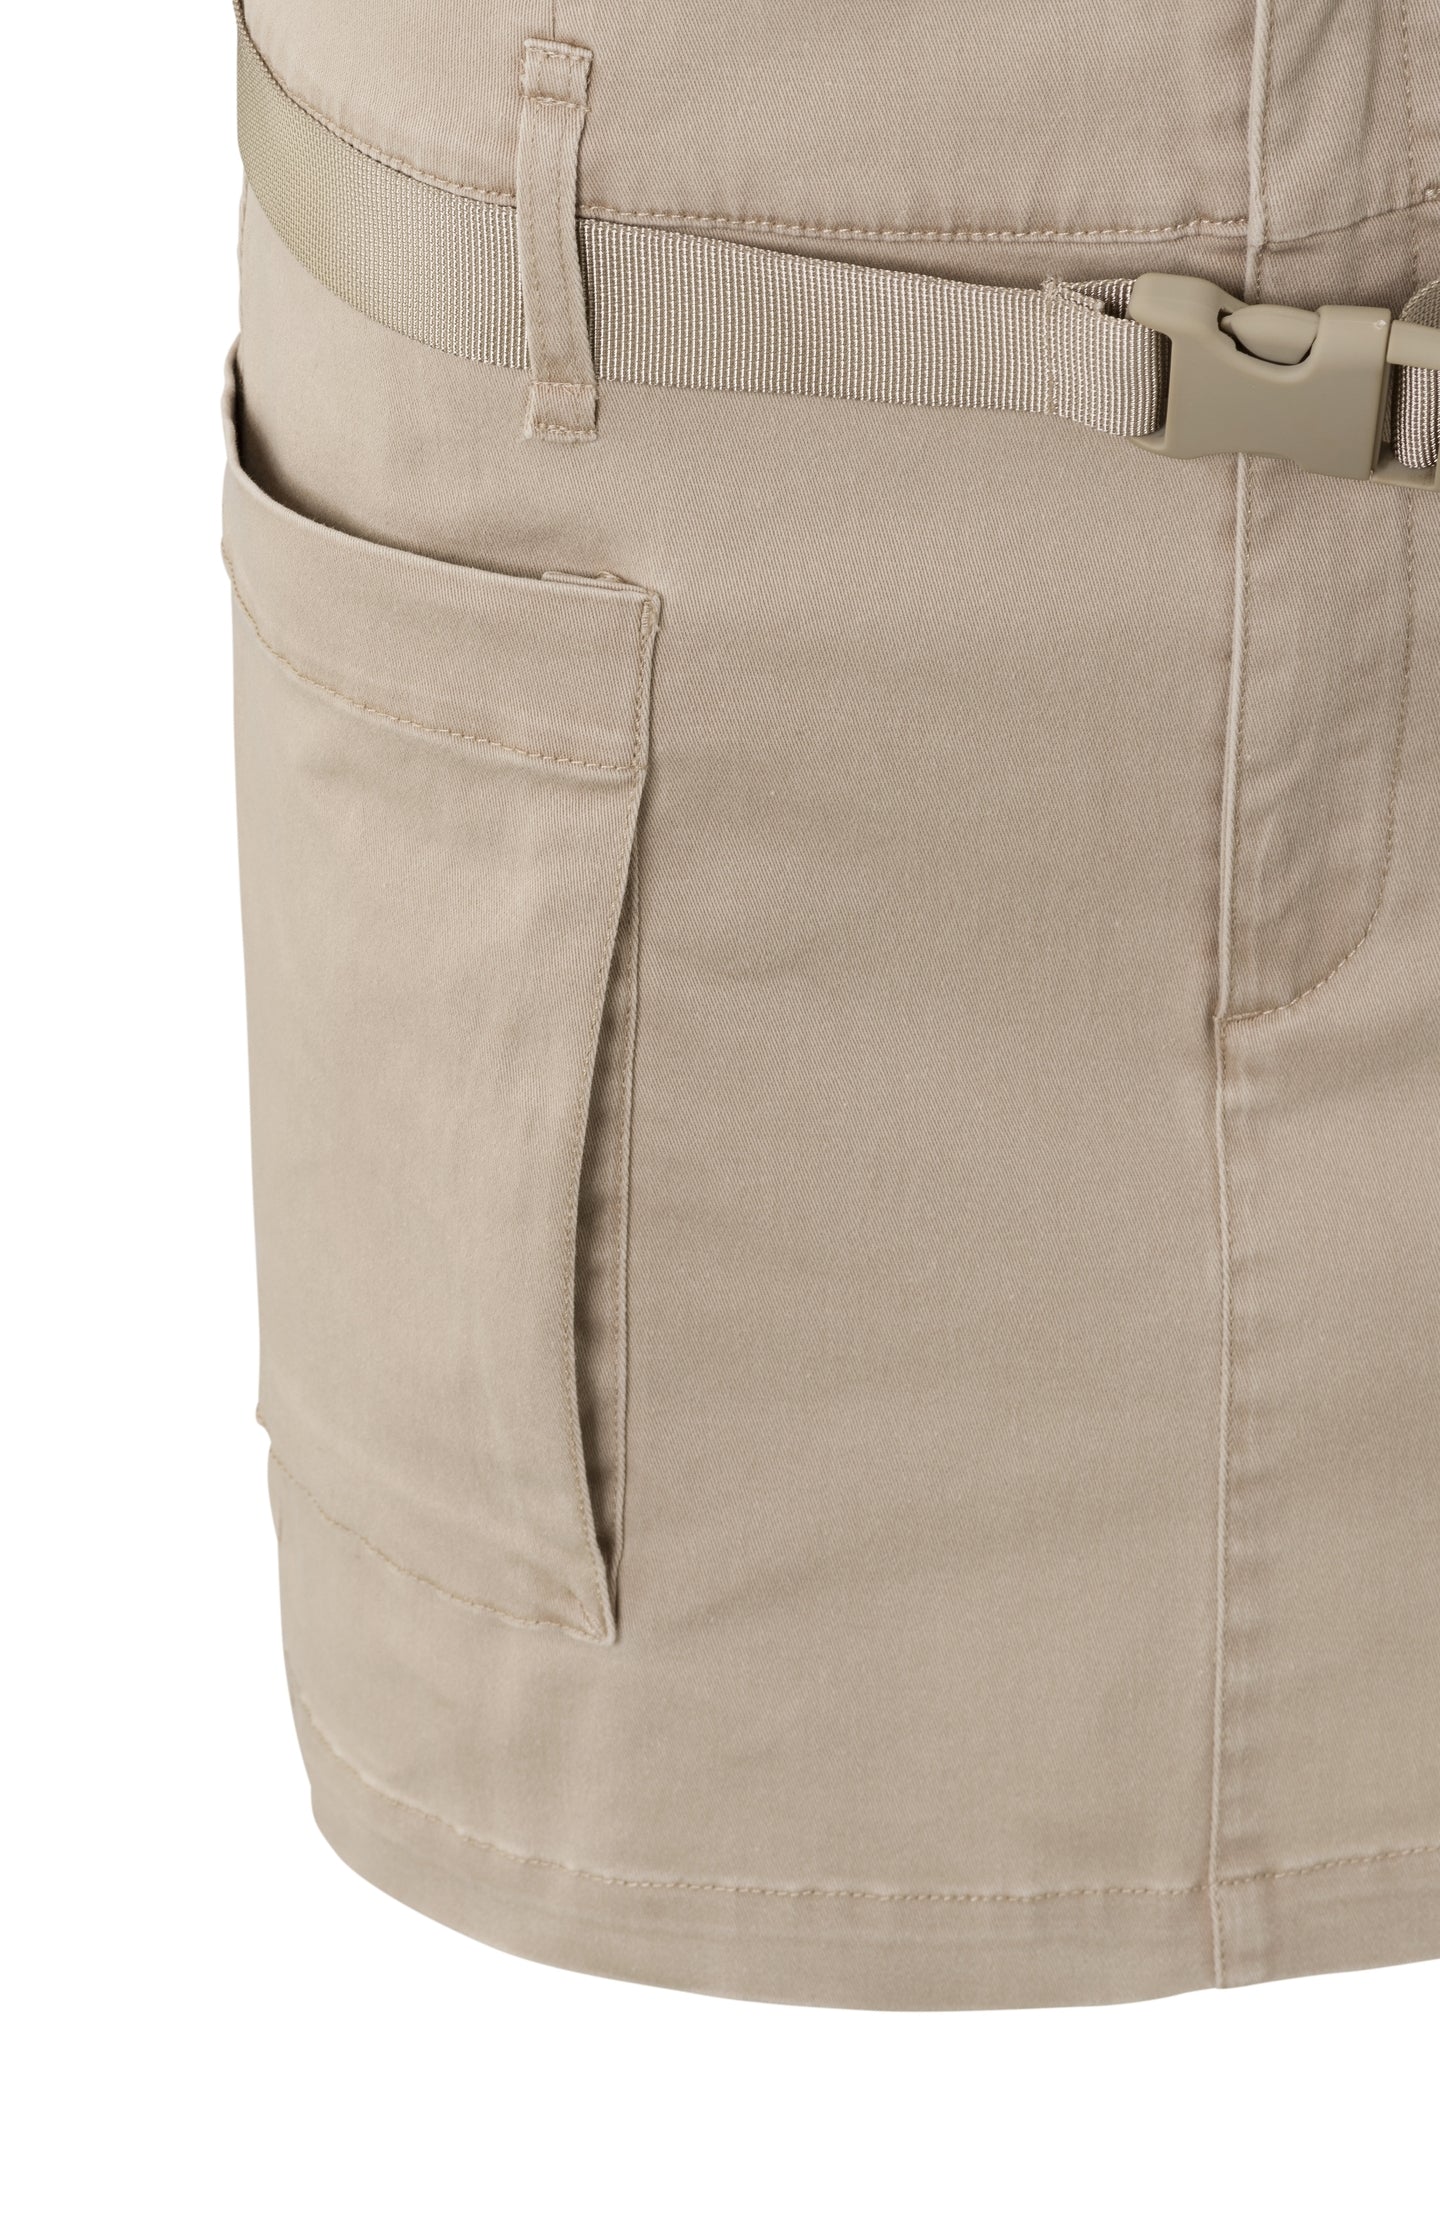 Cargo mini skirt with cargo belt, pockets and zip fly